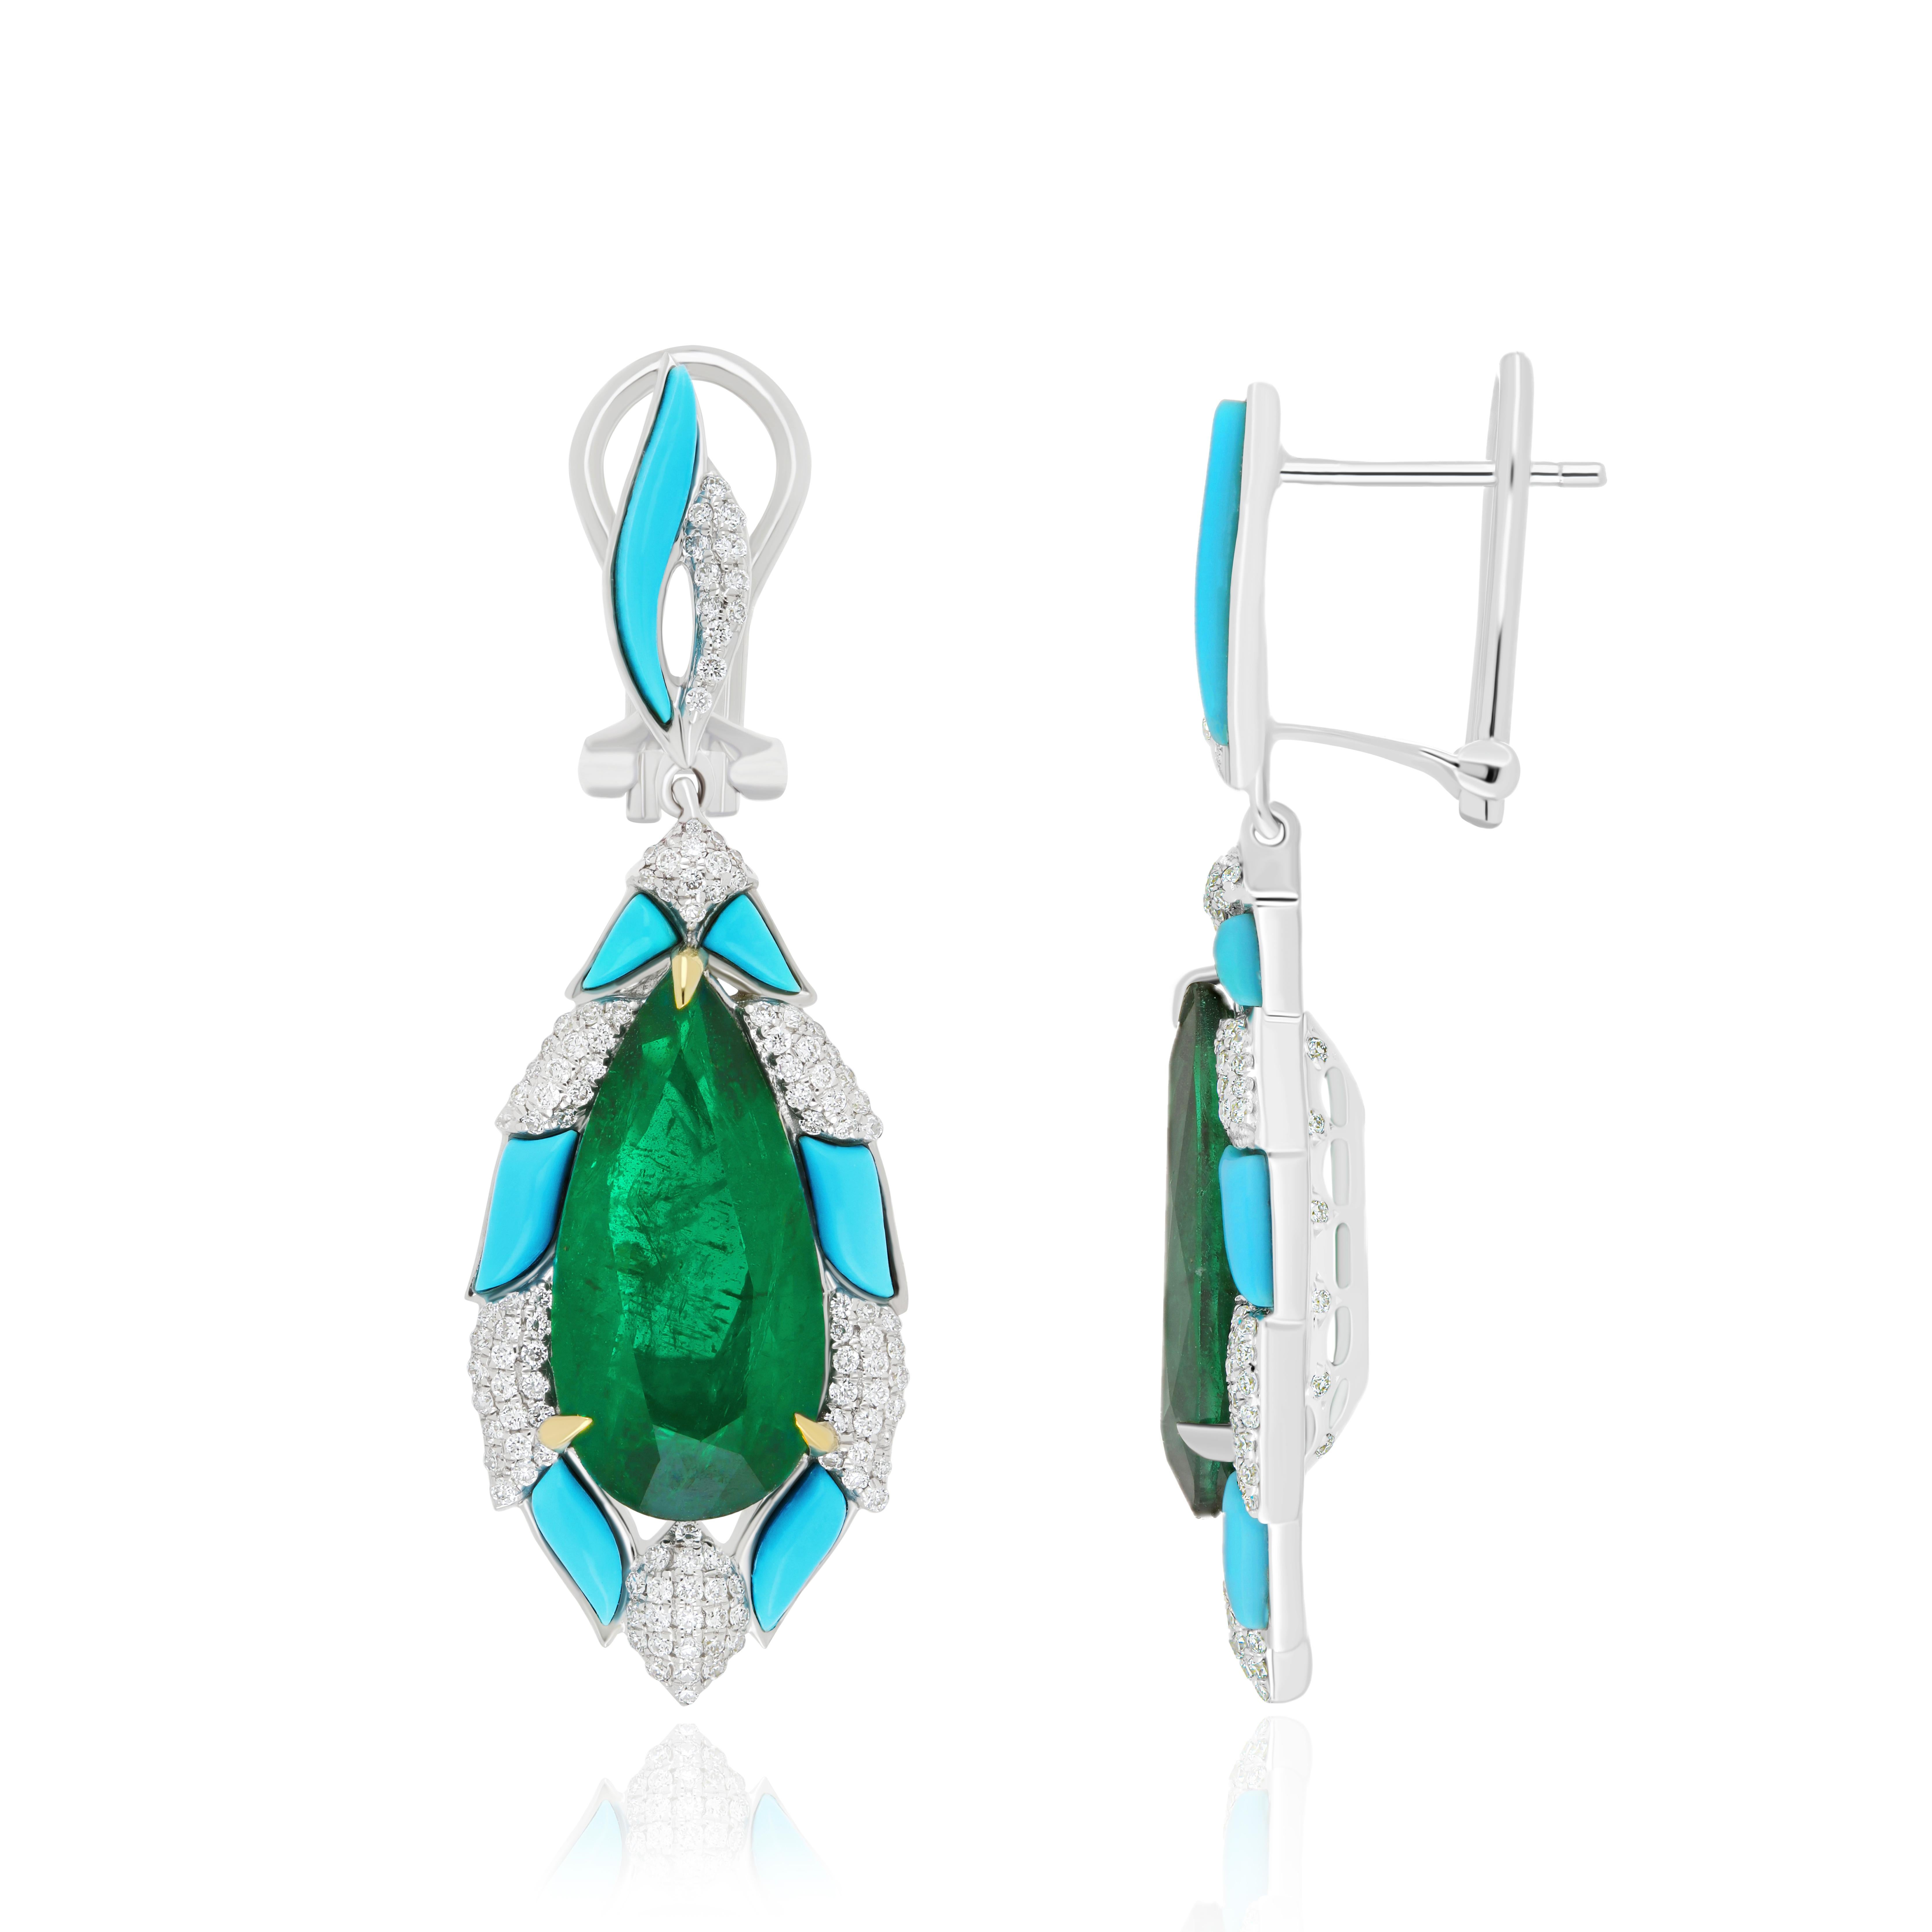 Elegant and Exquisitely detailed White Gold earrings, with 10.05CT's (total approx.) Emerald cut in Unique Pear Shape, Turquoise with fancy cut weight 2.45CT's ( approx.) And accented with micro pave Diamonds, weighing approx. 0.81cts. (total